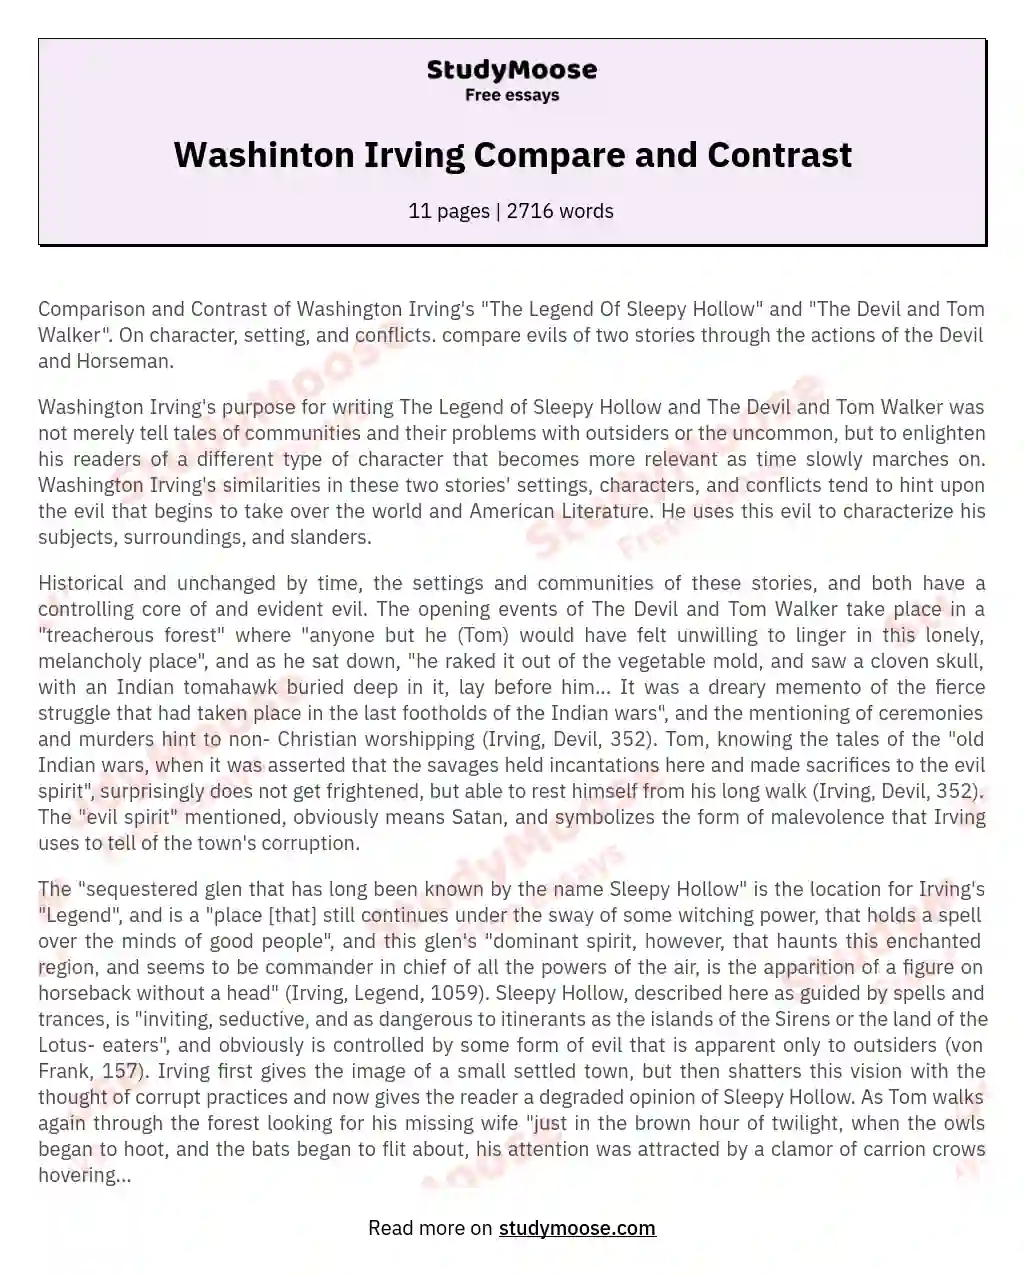 Washinton Irving Compare and Contrast essay